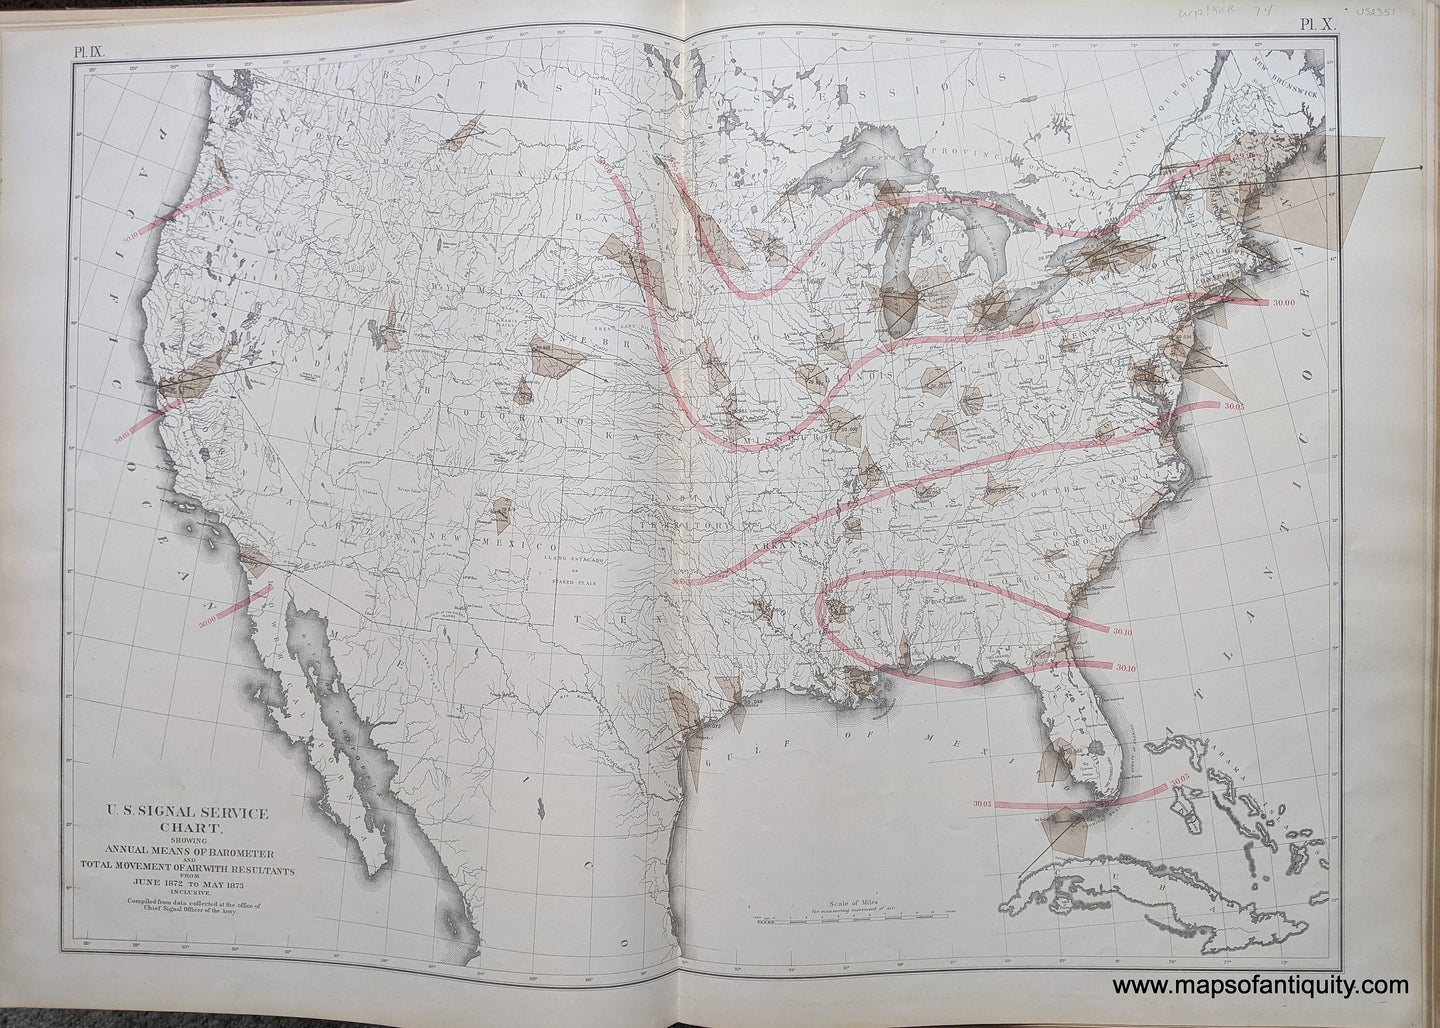 Genuine-Antique-Map-U.S.-Signal-Service-Chart-showing-Annual-Means-of-Barometer-and-Total-Movement-of-Air-with-Resultants-from-June-1872-to-May-1873-Inclusive.-United-States--1874-Walker-/-Bien-Maps-Of-Antiquity-1800s-19th-century